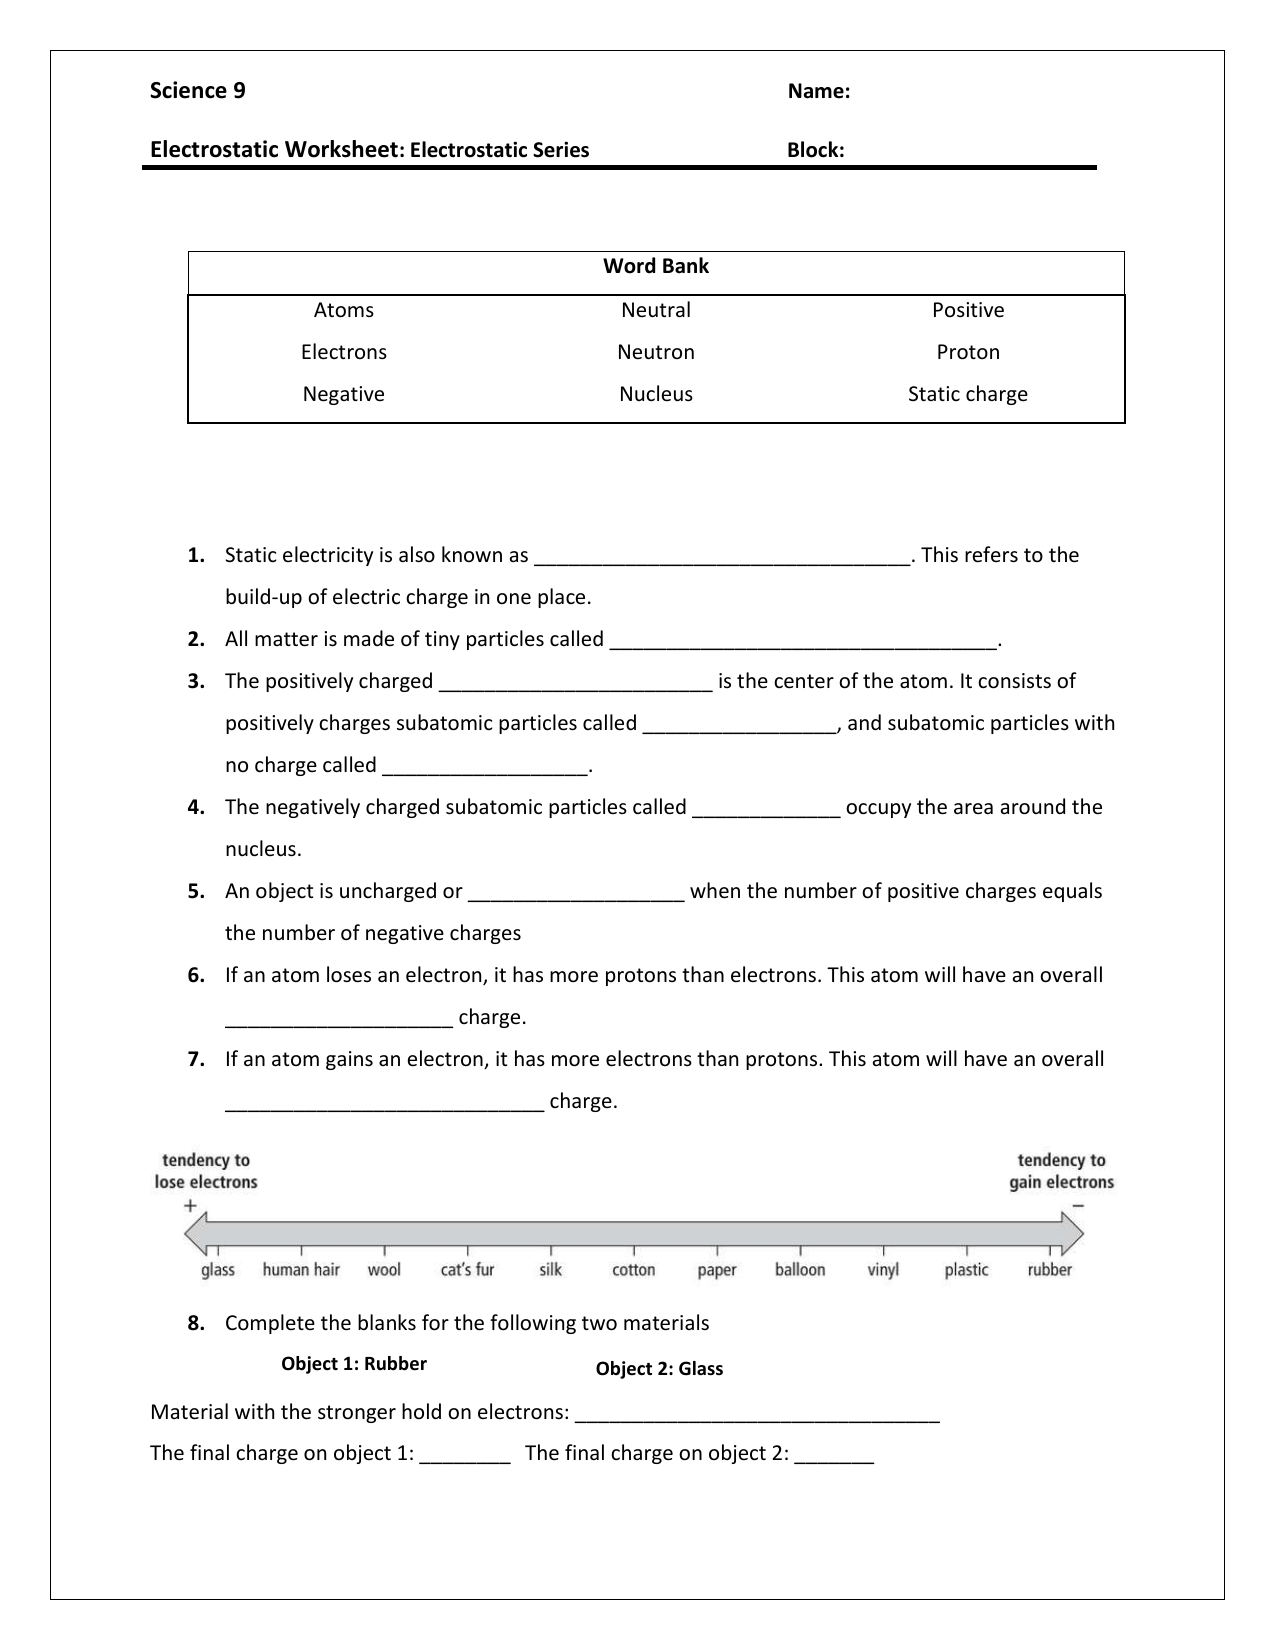 Static Electricity Worksheet Intended For Static Electricity Worksheet Answers